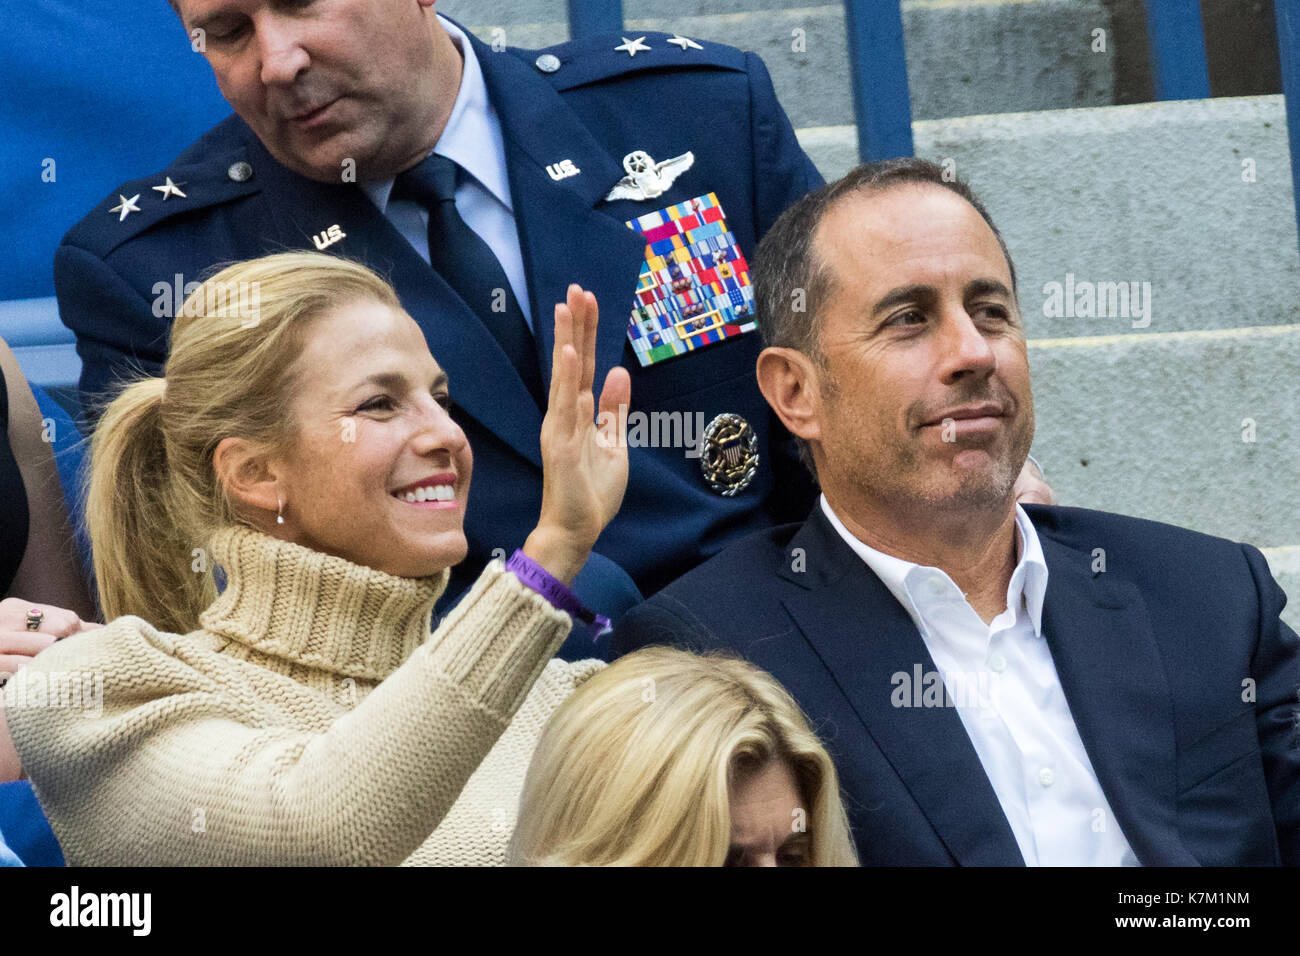 Jerry Seinfeld and wife  Jessica watching the Men's Singles Final  at the 2017 US Open Tennis Championships Stock Photo